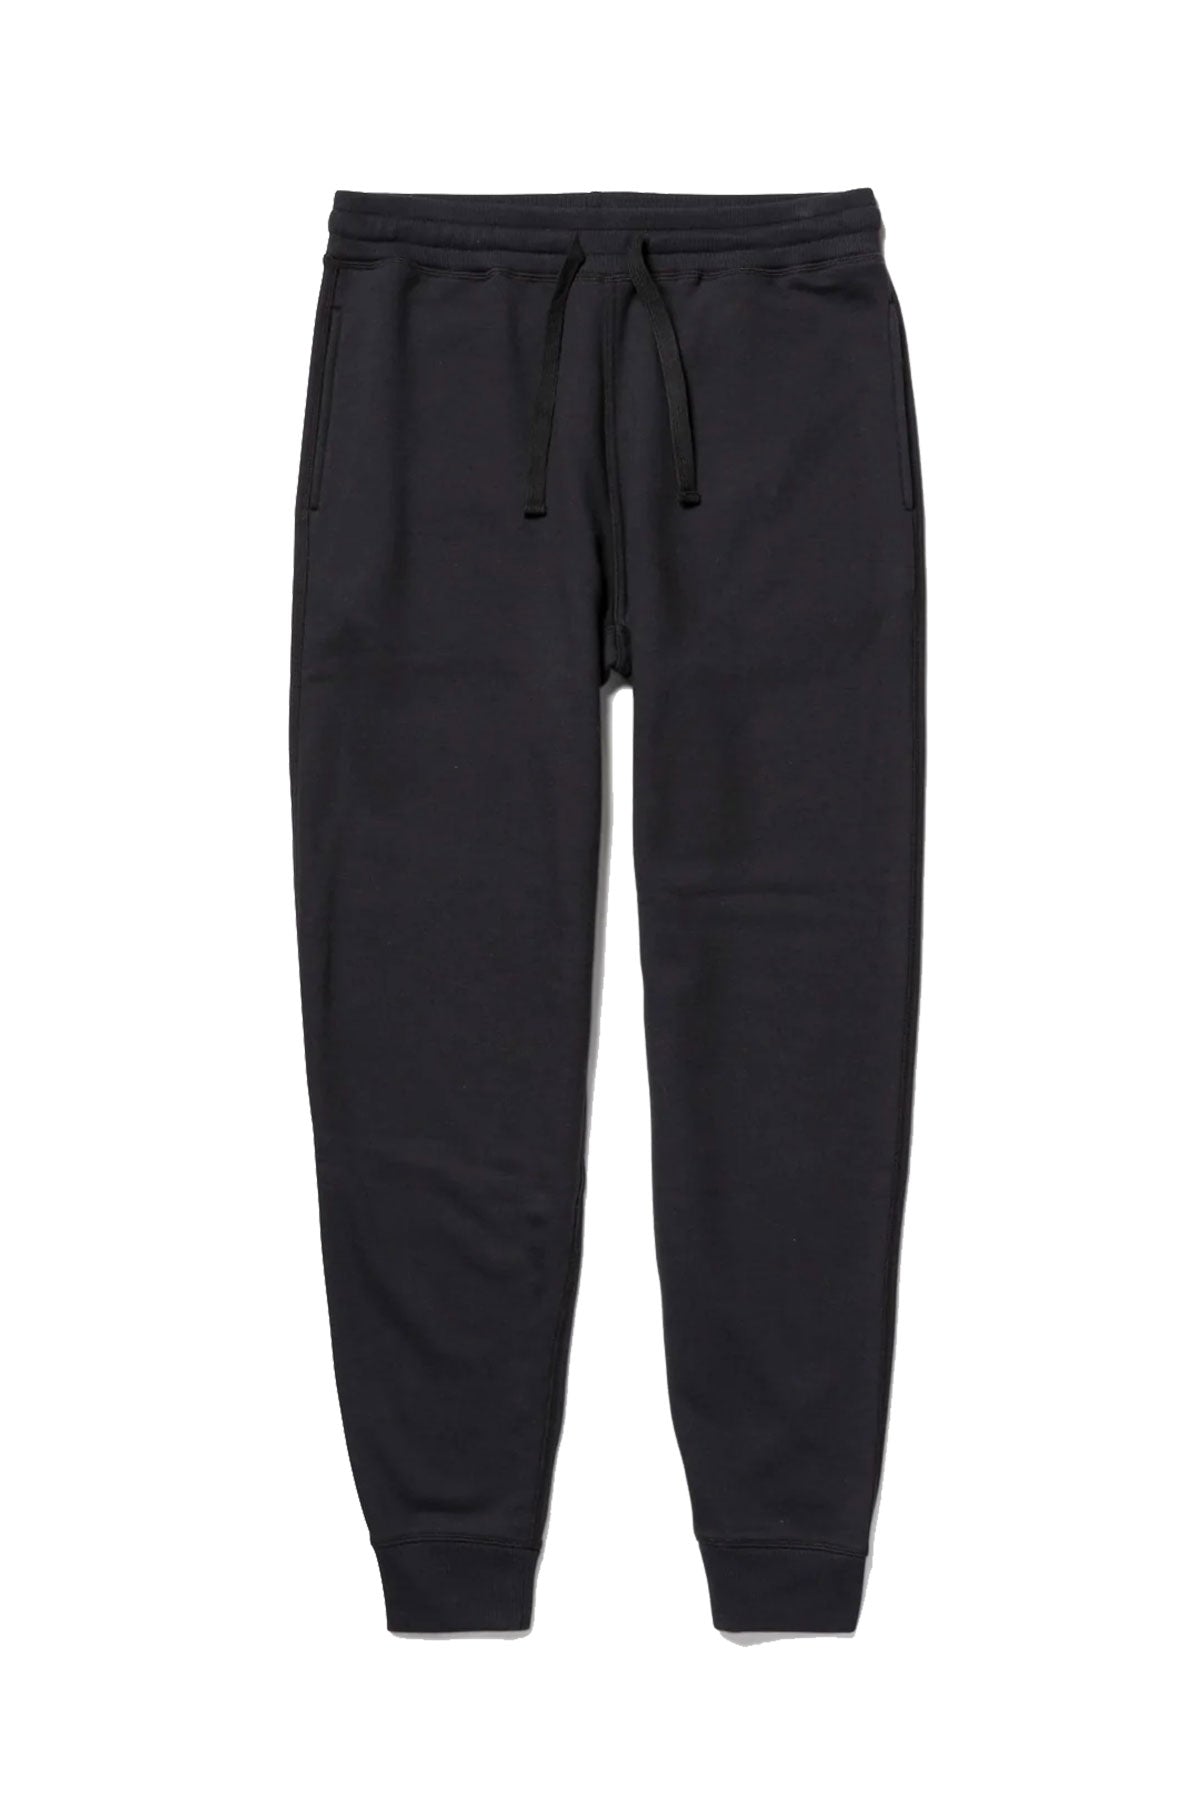 Richer Poorer - Recycled Sweatpant - Black - Flatlay